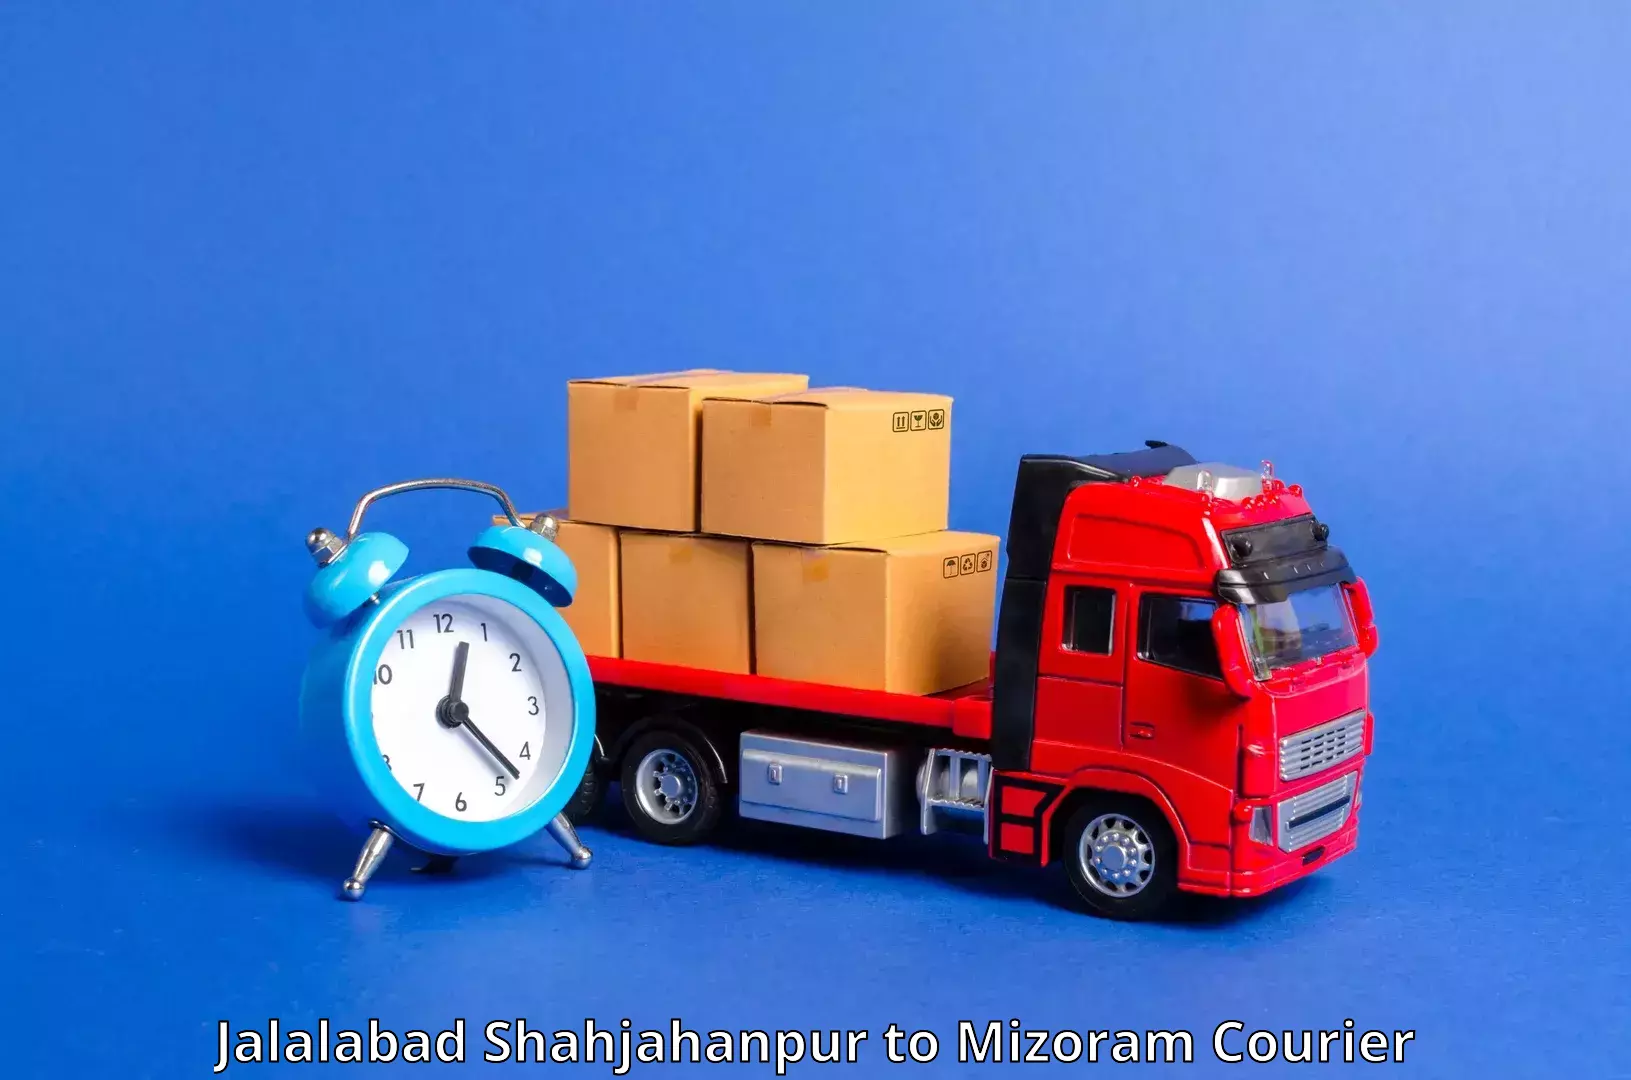 End-to-end delivery Jalalabad Shahjahanpur to Siaha